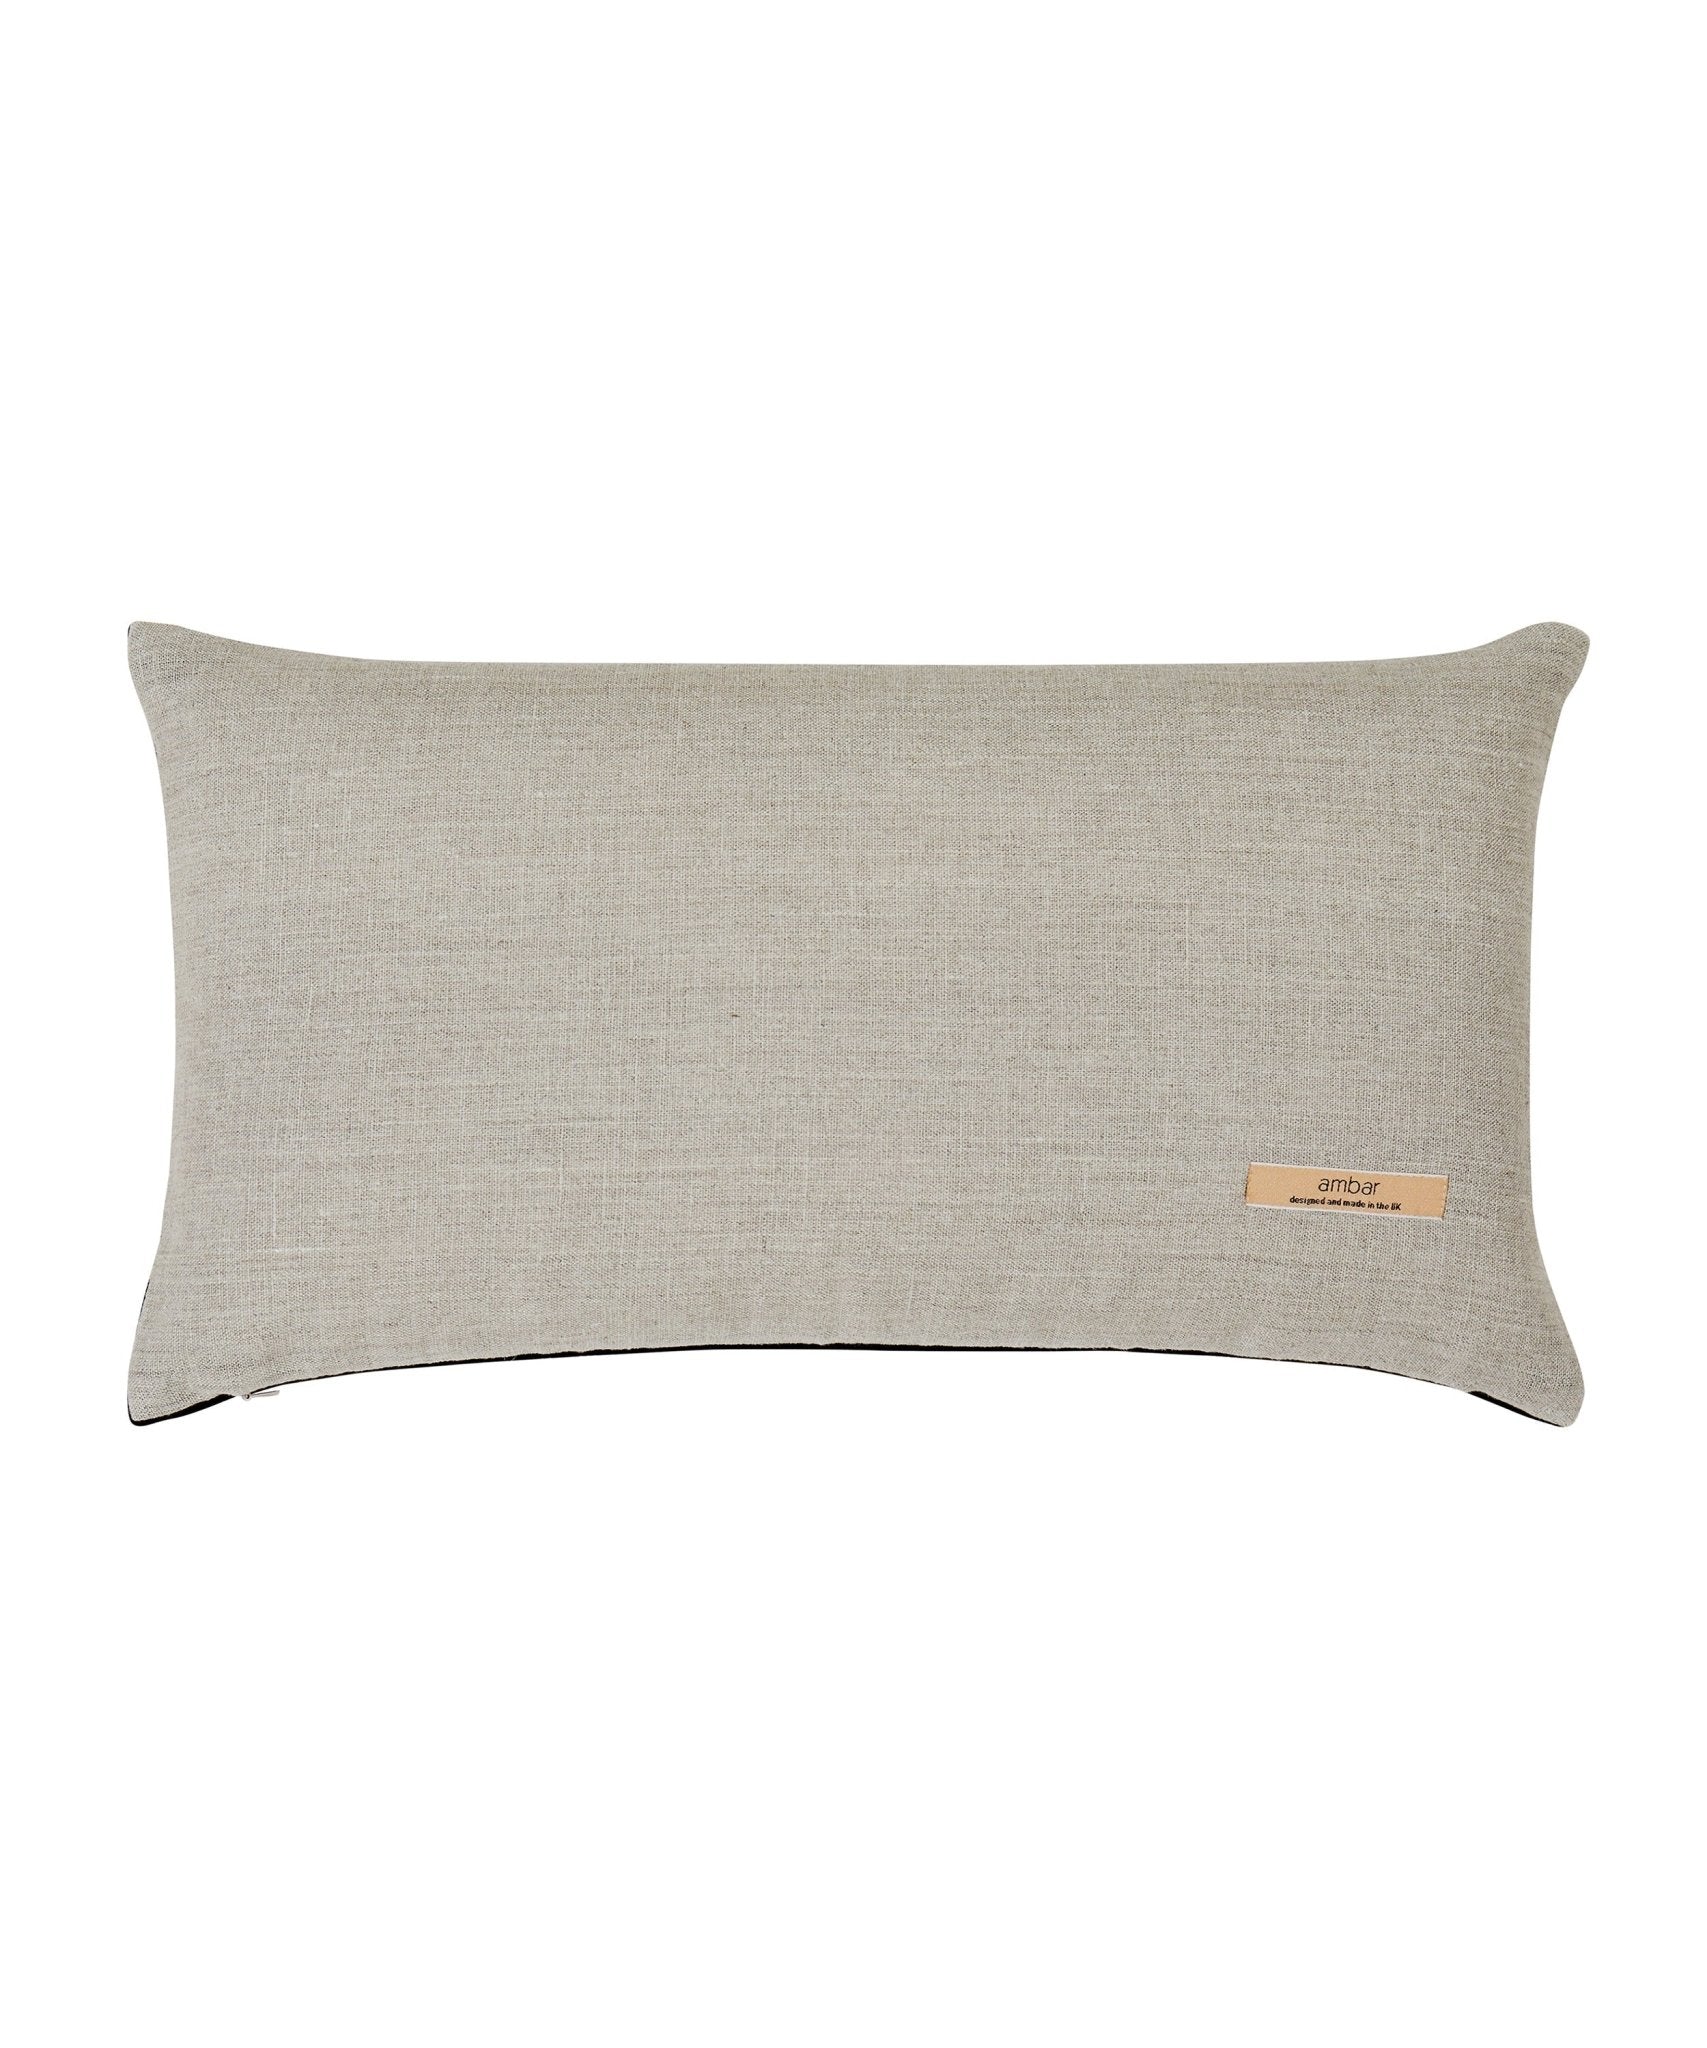 Green knitted Bolster Cushion Cover - Ambar Homeware - Linen backing - sewing in the UK